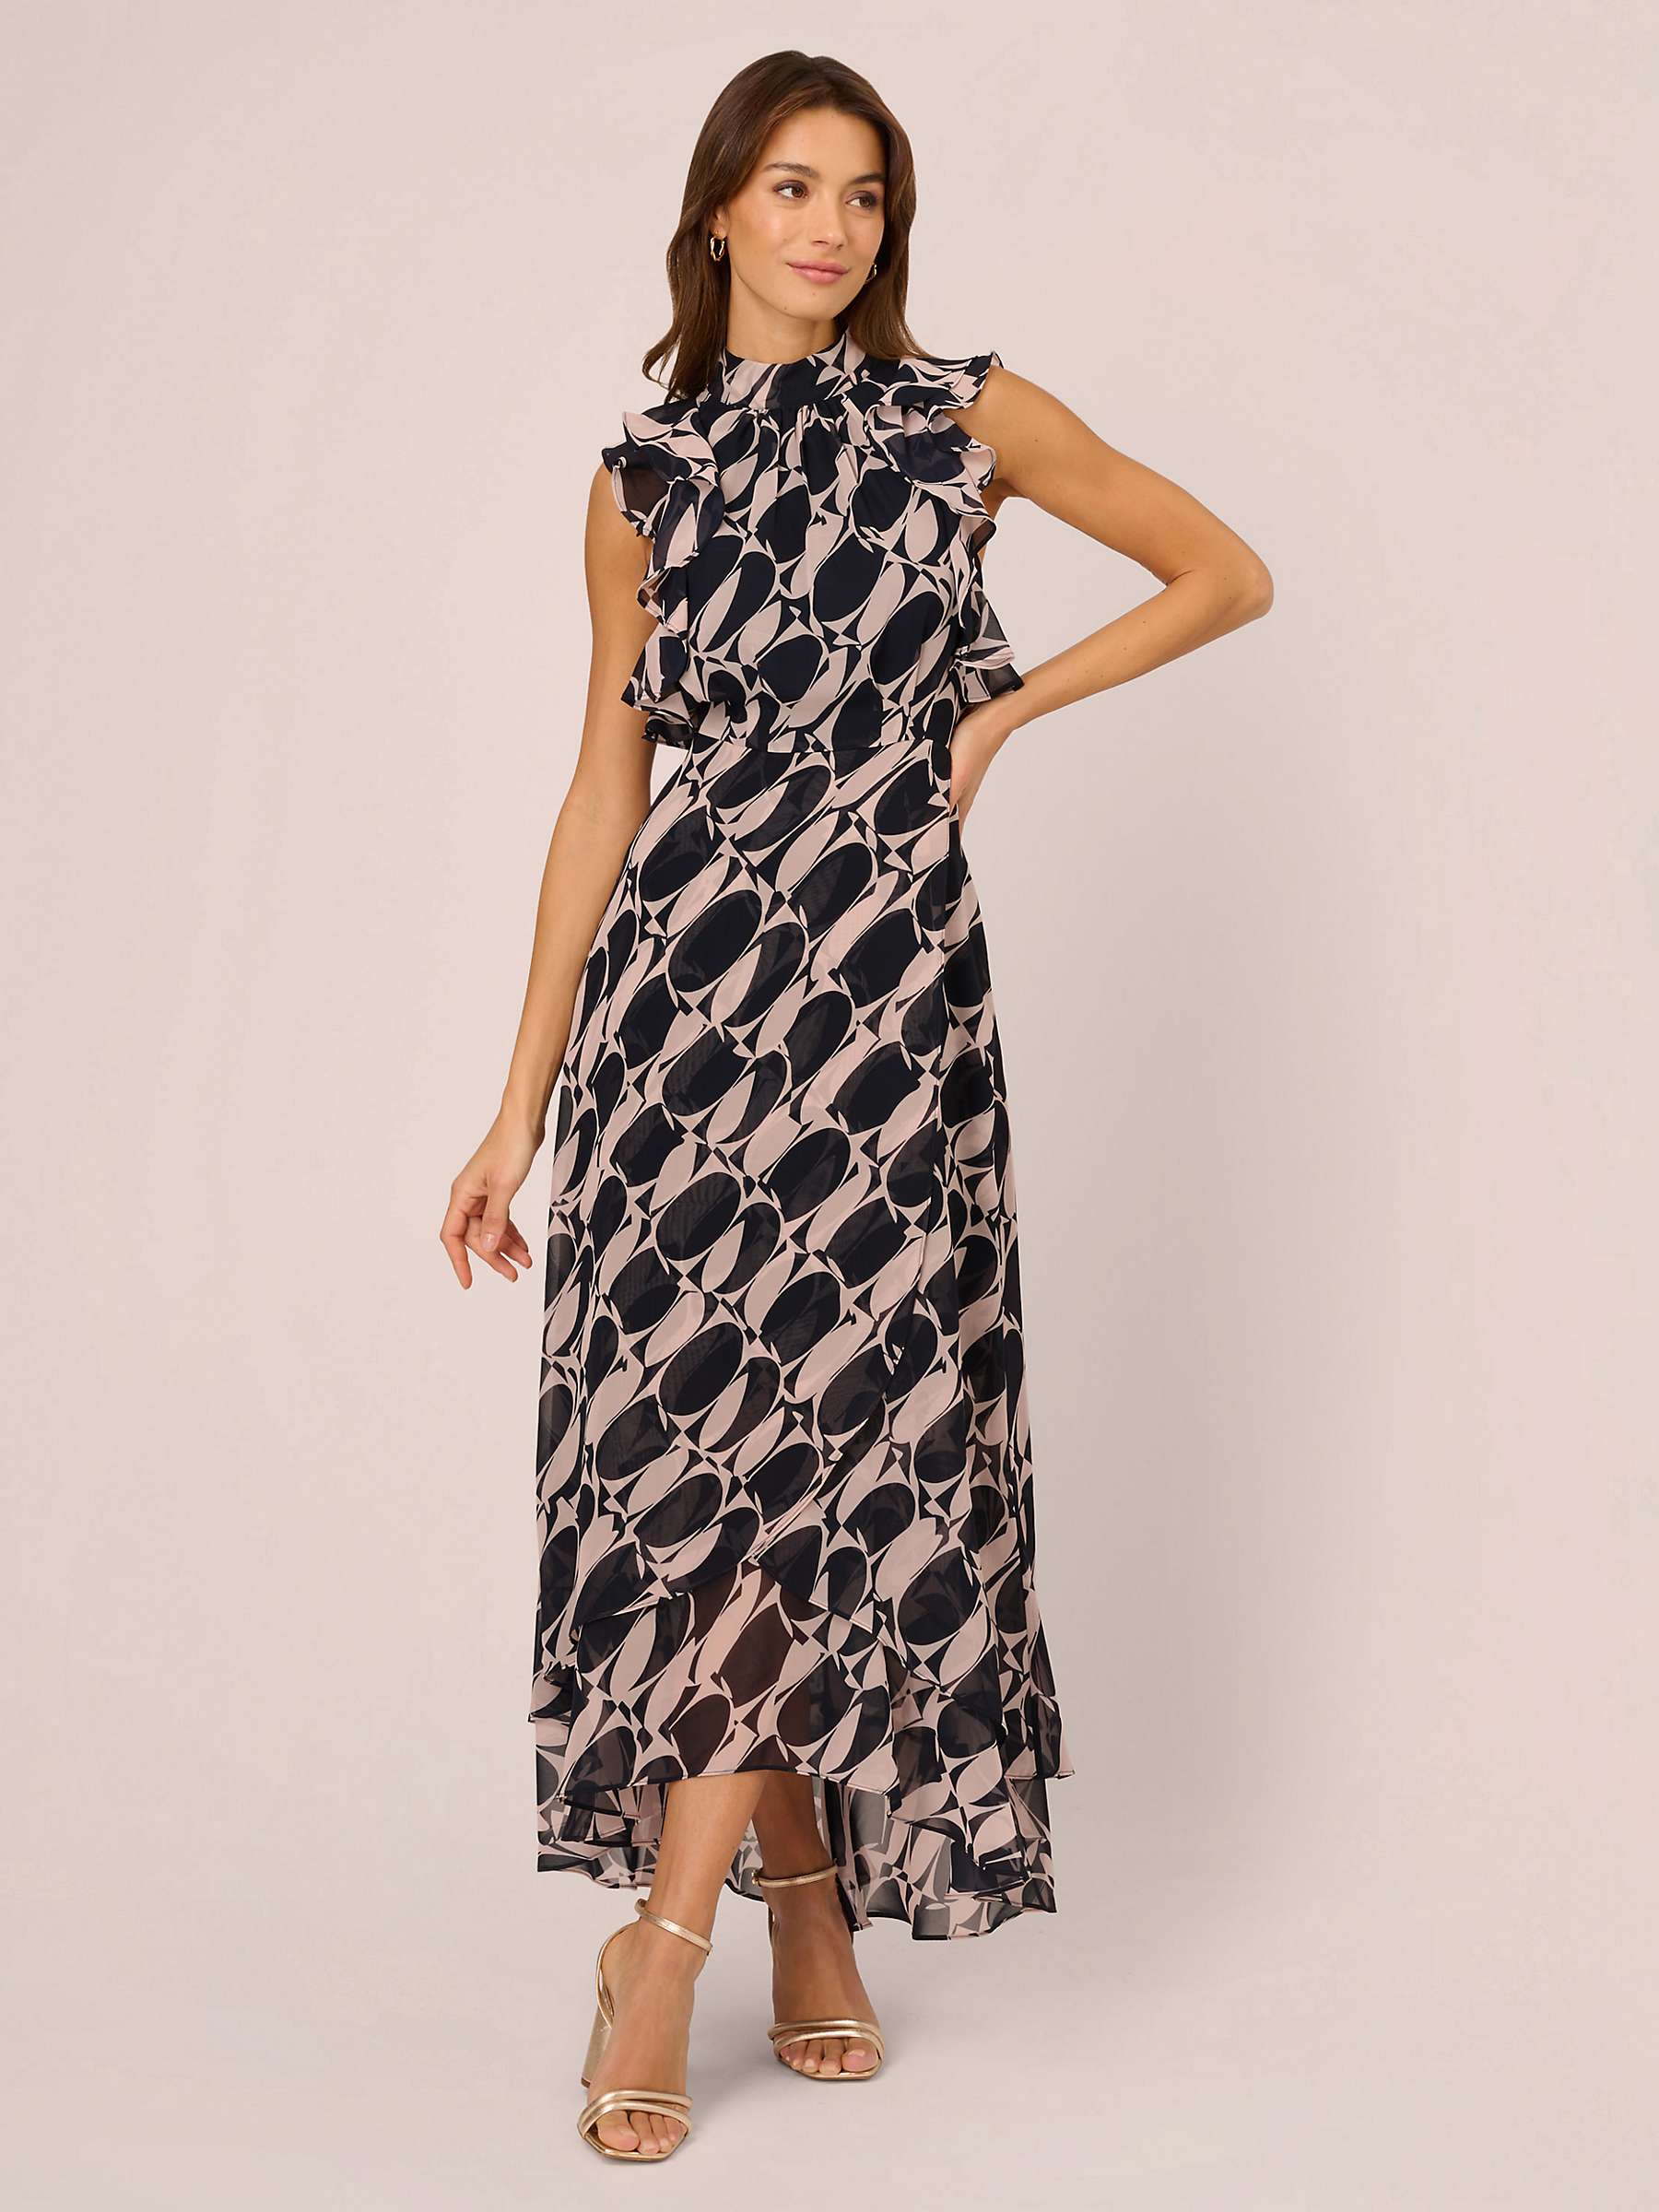 Buy Adrianna Papell Abstract Print Frill Maxi Dress, Navy/Blush Online at johnlewis.com